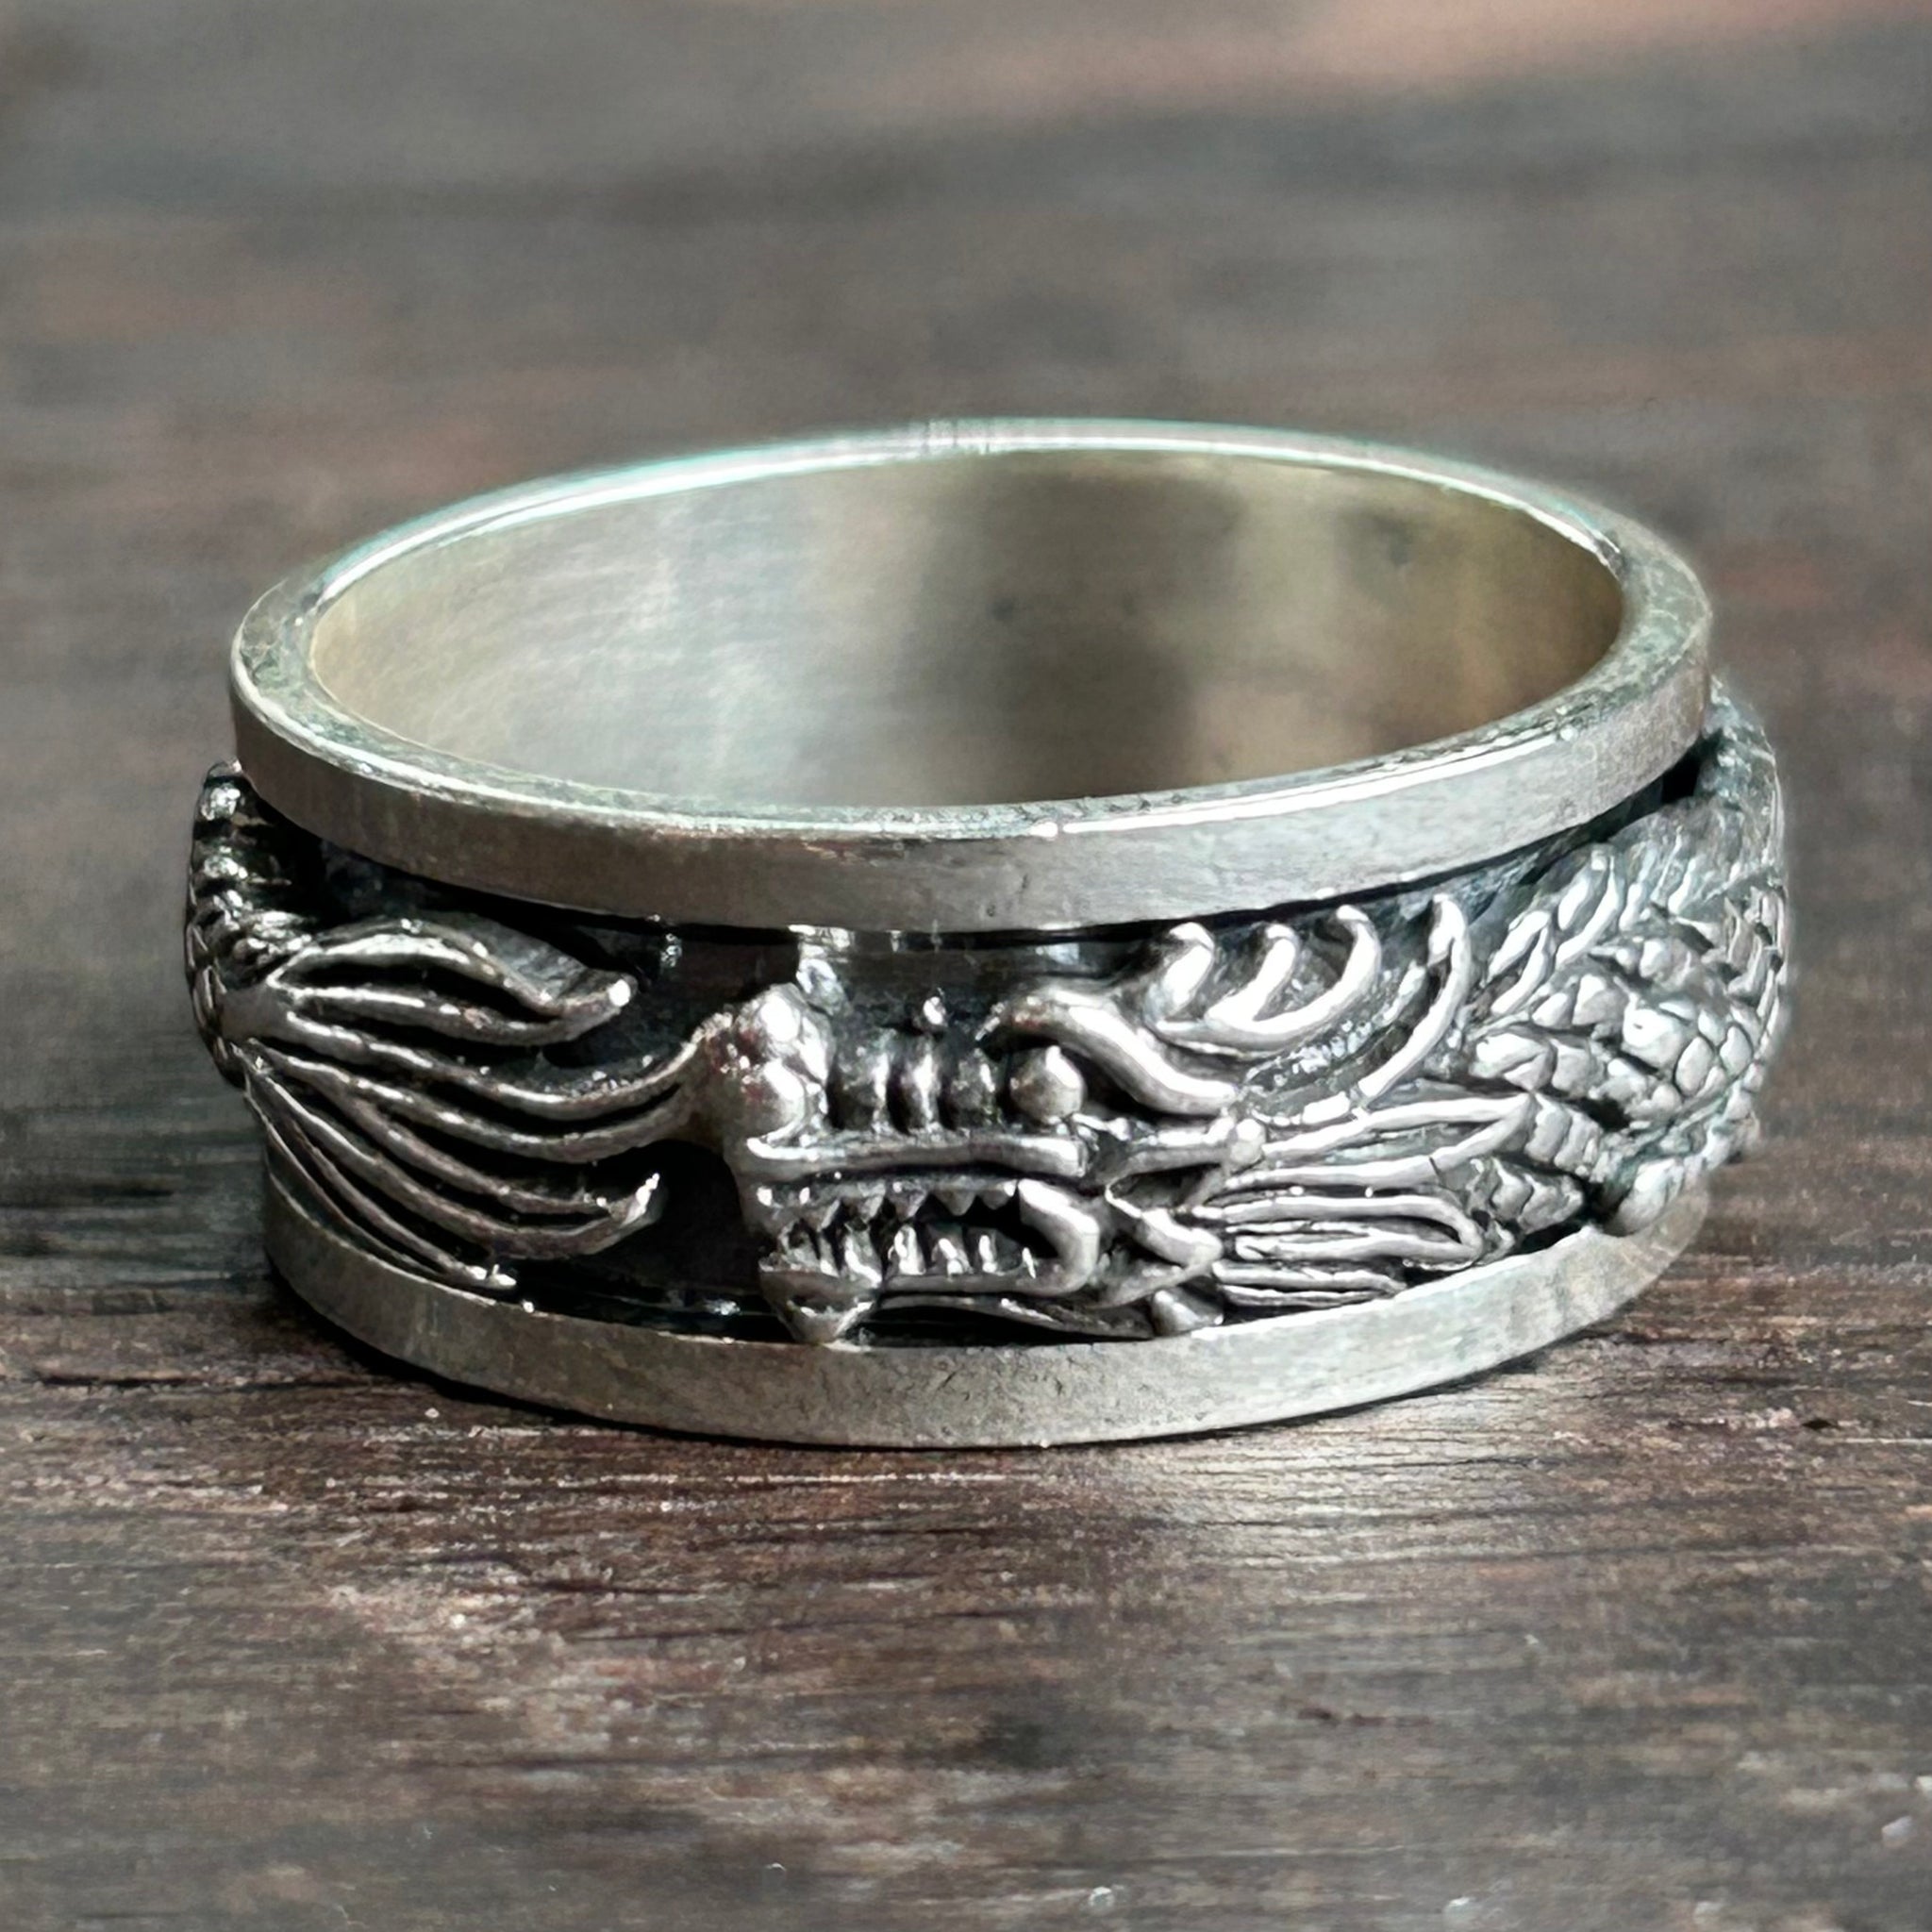 LARGE Sterling Silver Fidget / Spinning Ring